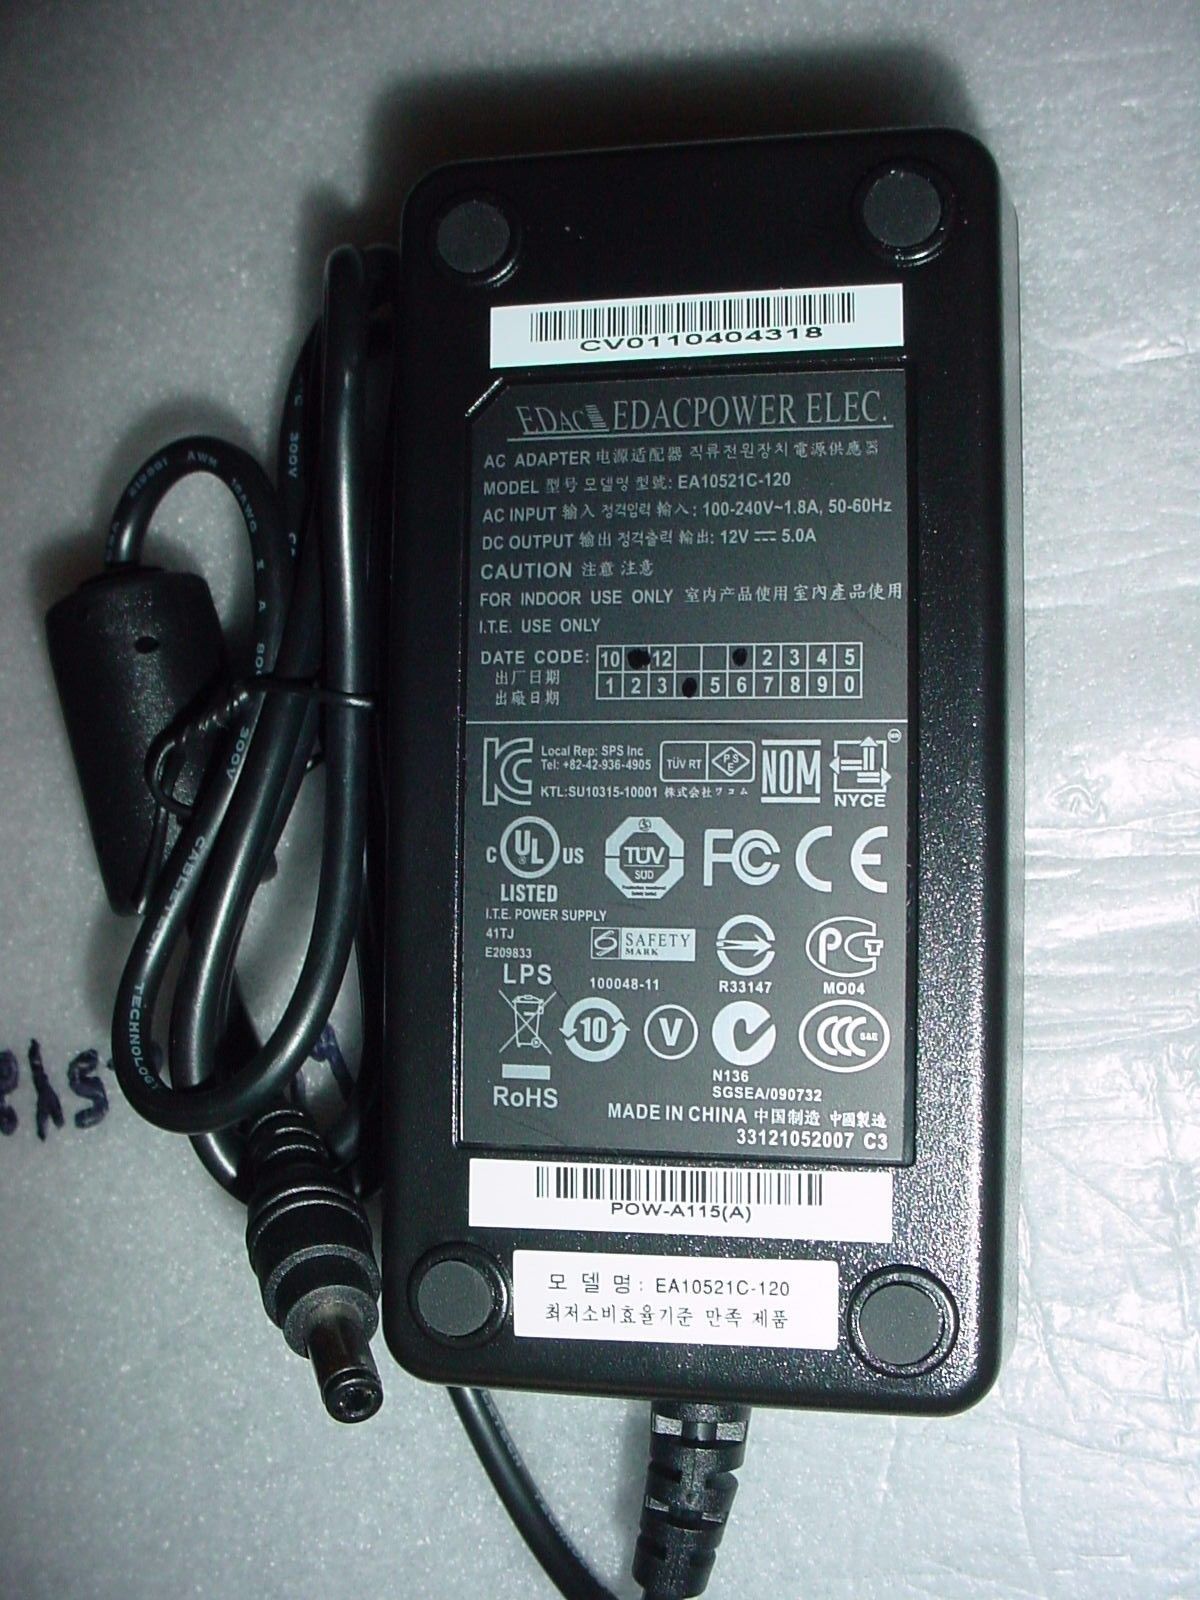 EDAC AC Adapter: EA10521C-120 Desktop Power Supply Charger Cord 12V 60W Type AC MPN EA10521C-120 Output Voltage 12V